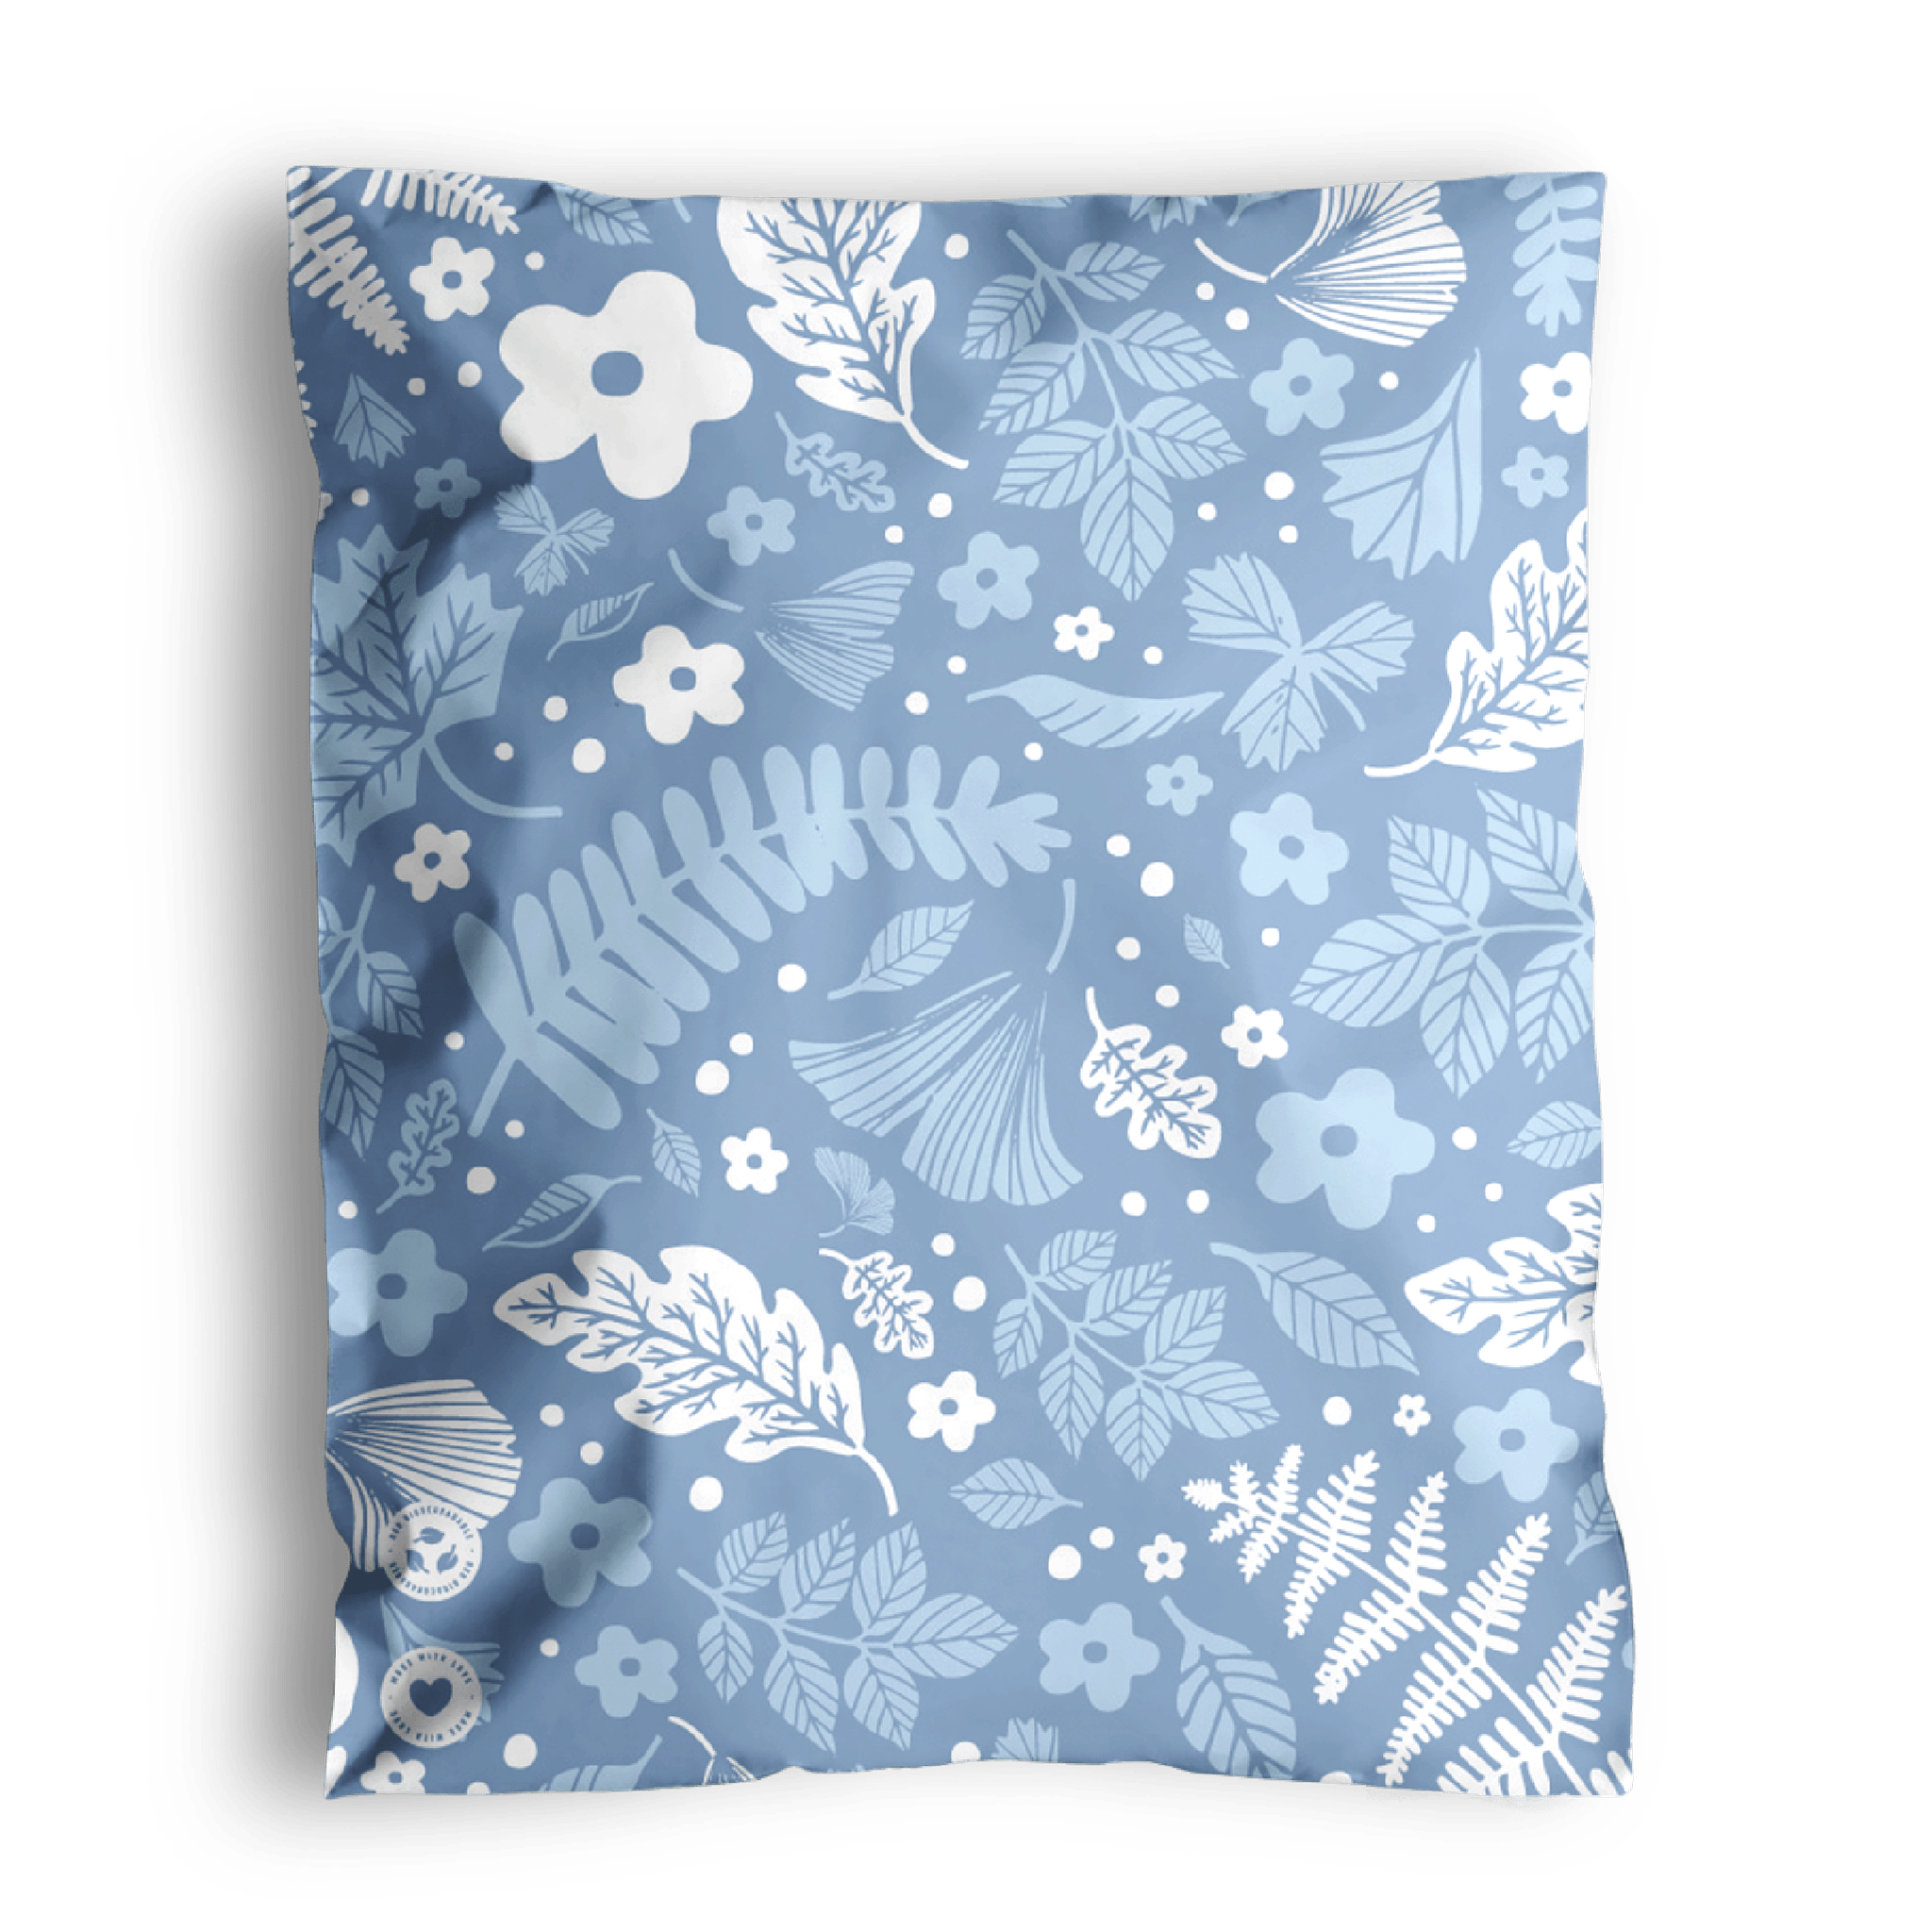 A patterned fabric with floral and leaf designs, perfect for creating Sapphire Evergreen Biodegradable Mailer Bags 10" x 13" by impack.co.